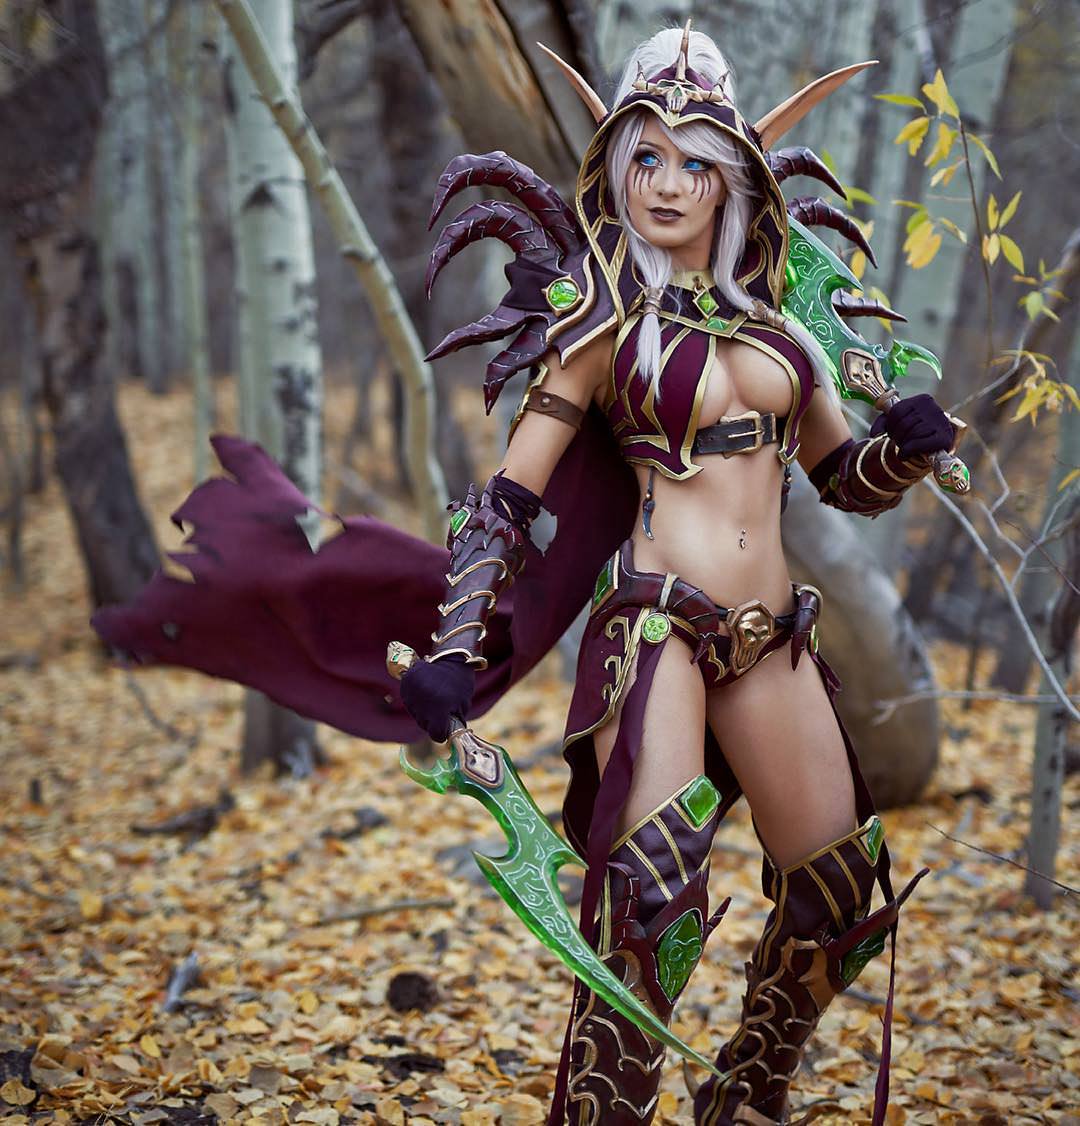 Valeera From Work Of Warcraft Cosplay Done By K8sarkissia